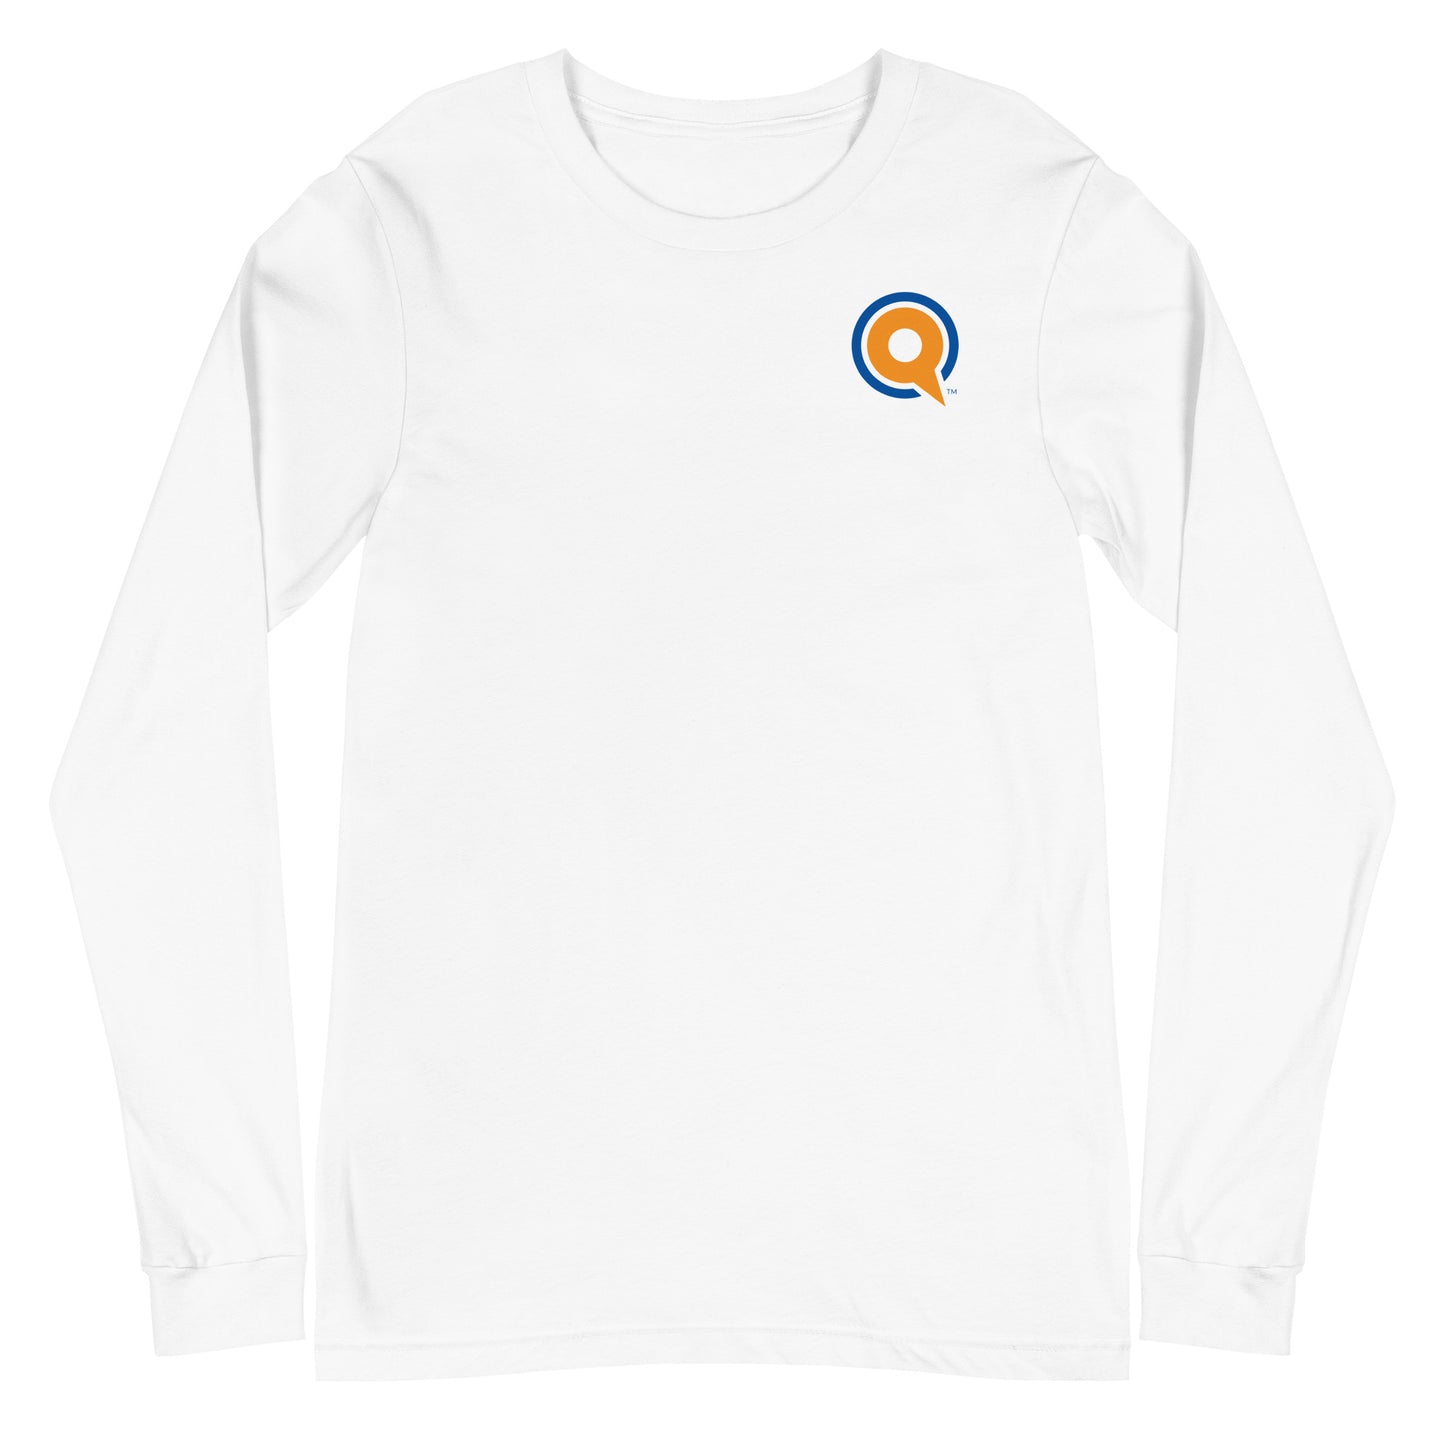 Yaqeen Q Long Sleeve Tee in White